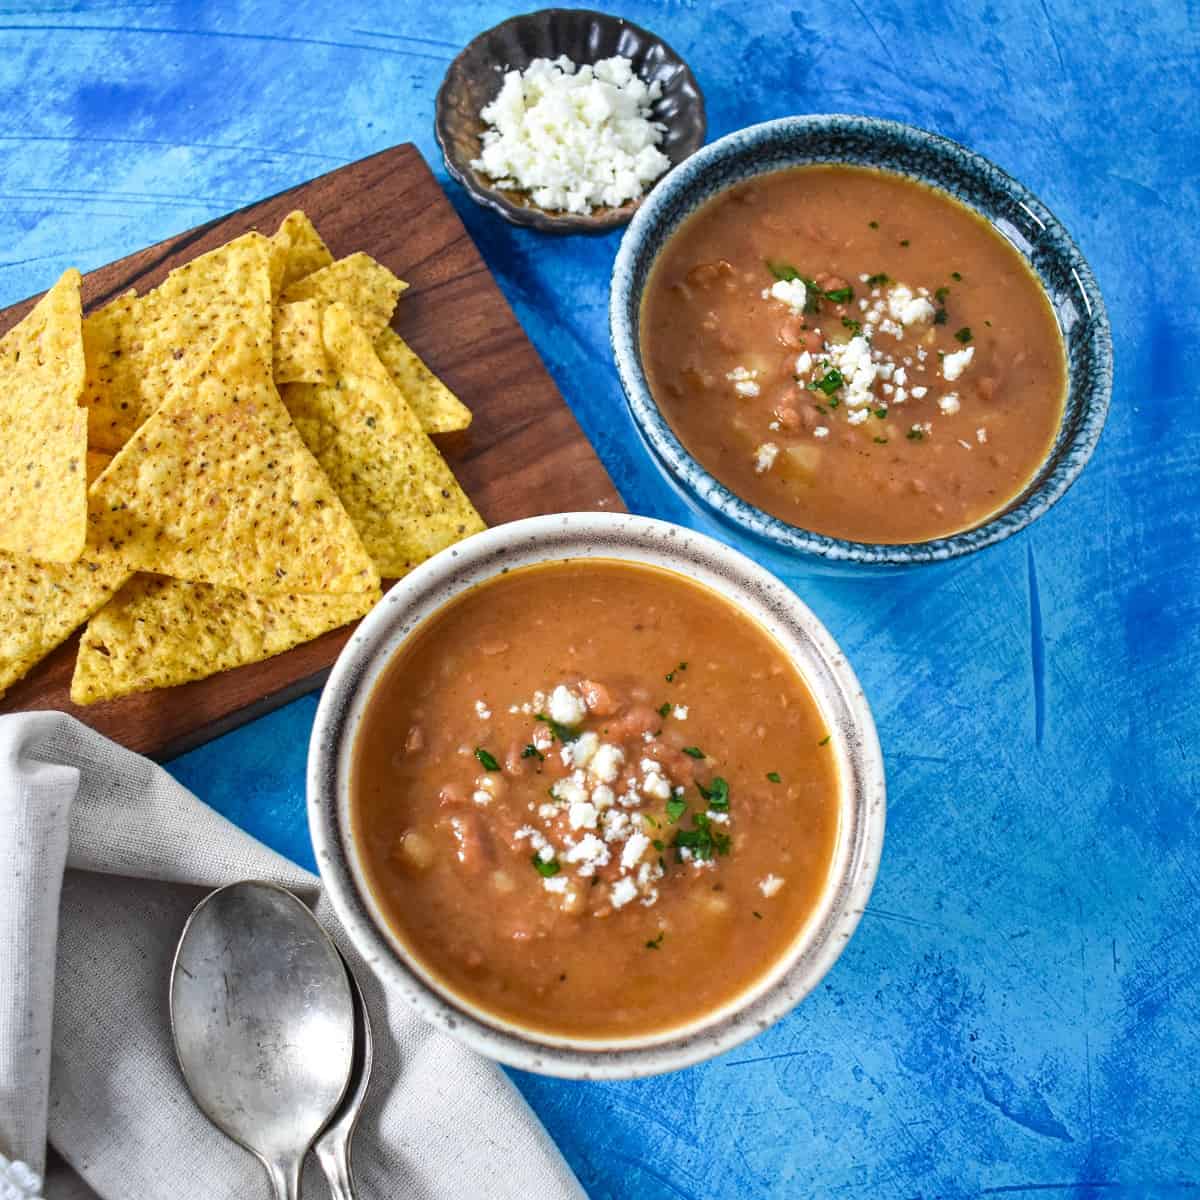 Two bowls of pinto bean soup served with tortilla chips and queso fresco on the side all set on a blue table.